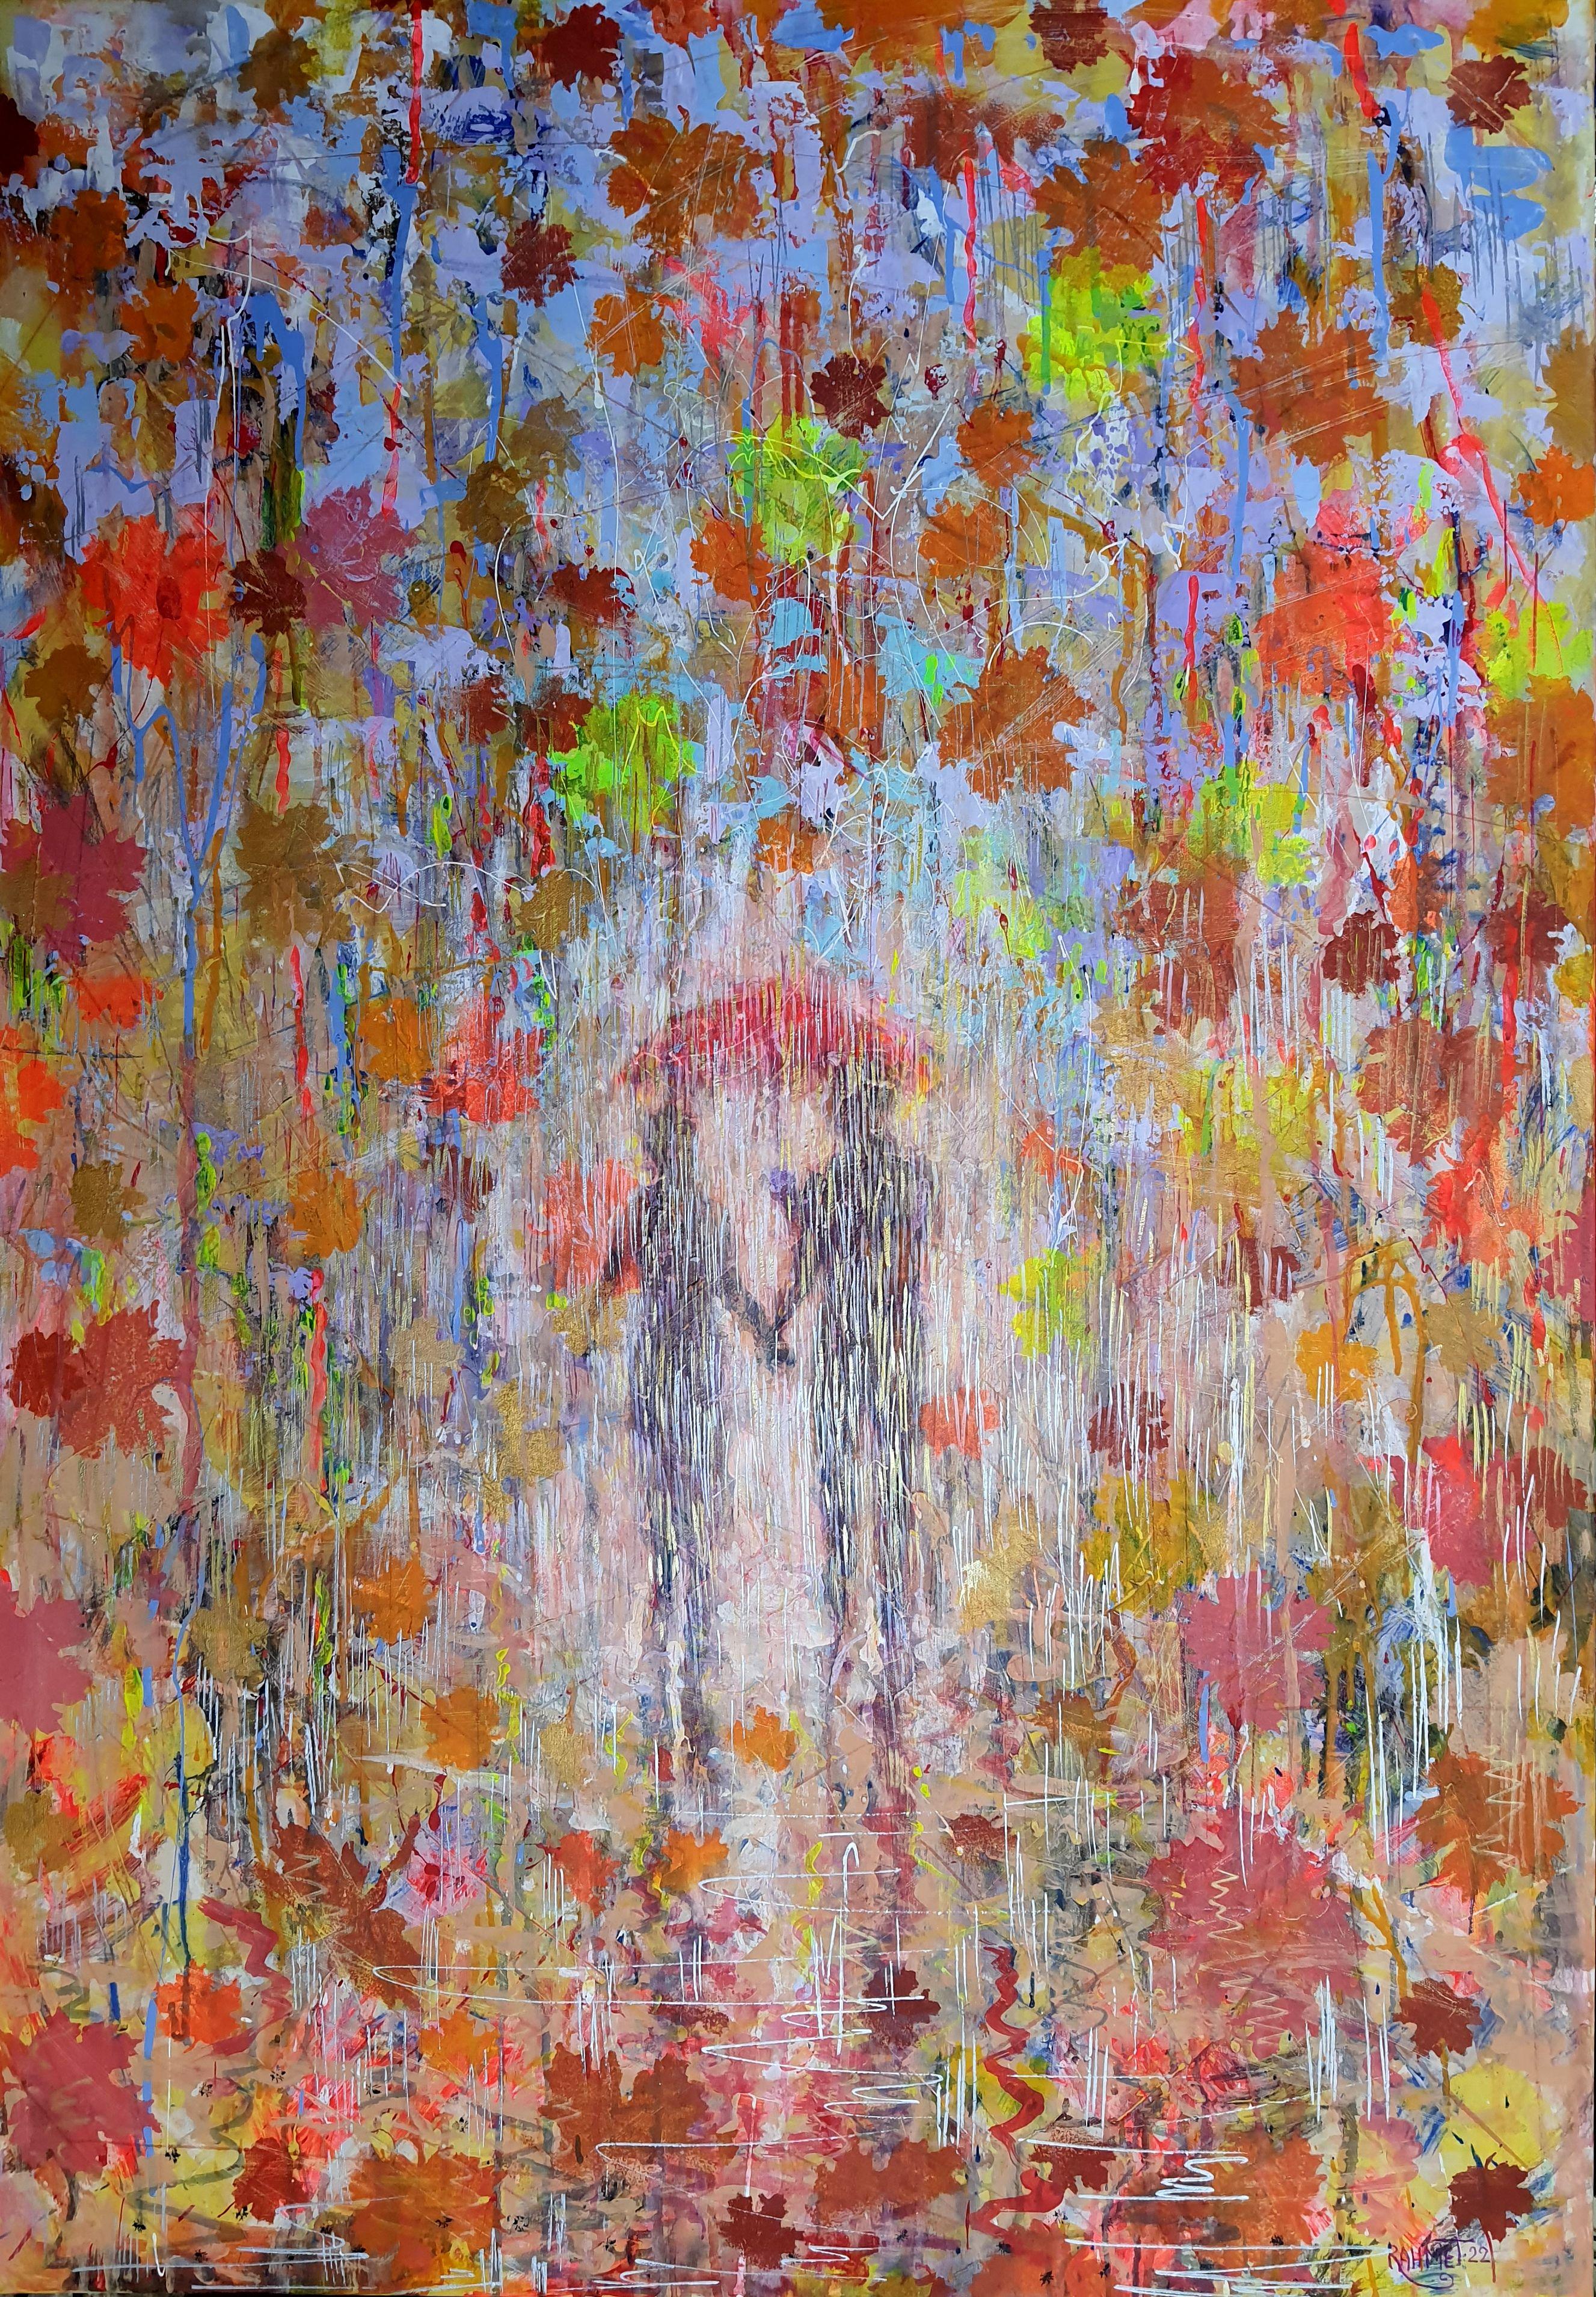 In my artwork, I embraced the raw emotions of a fleeting autumn romance under the rain. The vibrant acrylic and oil hues blend in an impressionistic dance, capturing the ephemeral, heart-tugging moment two souls share an umbrella. This piece